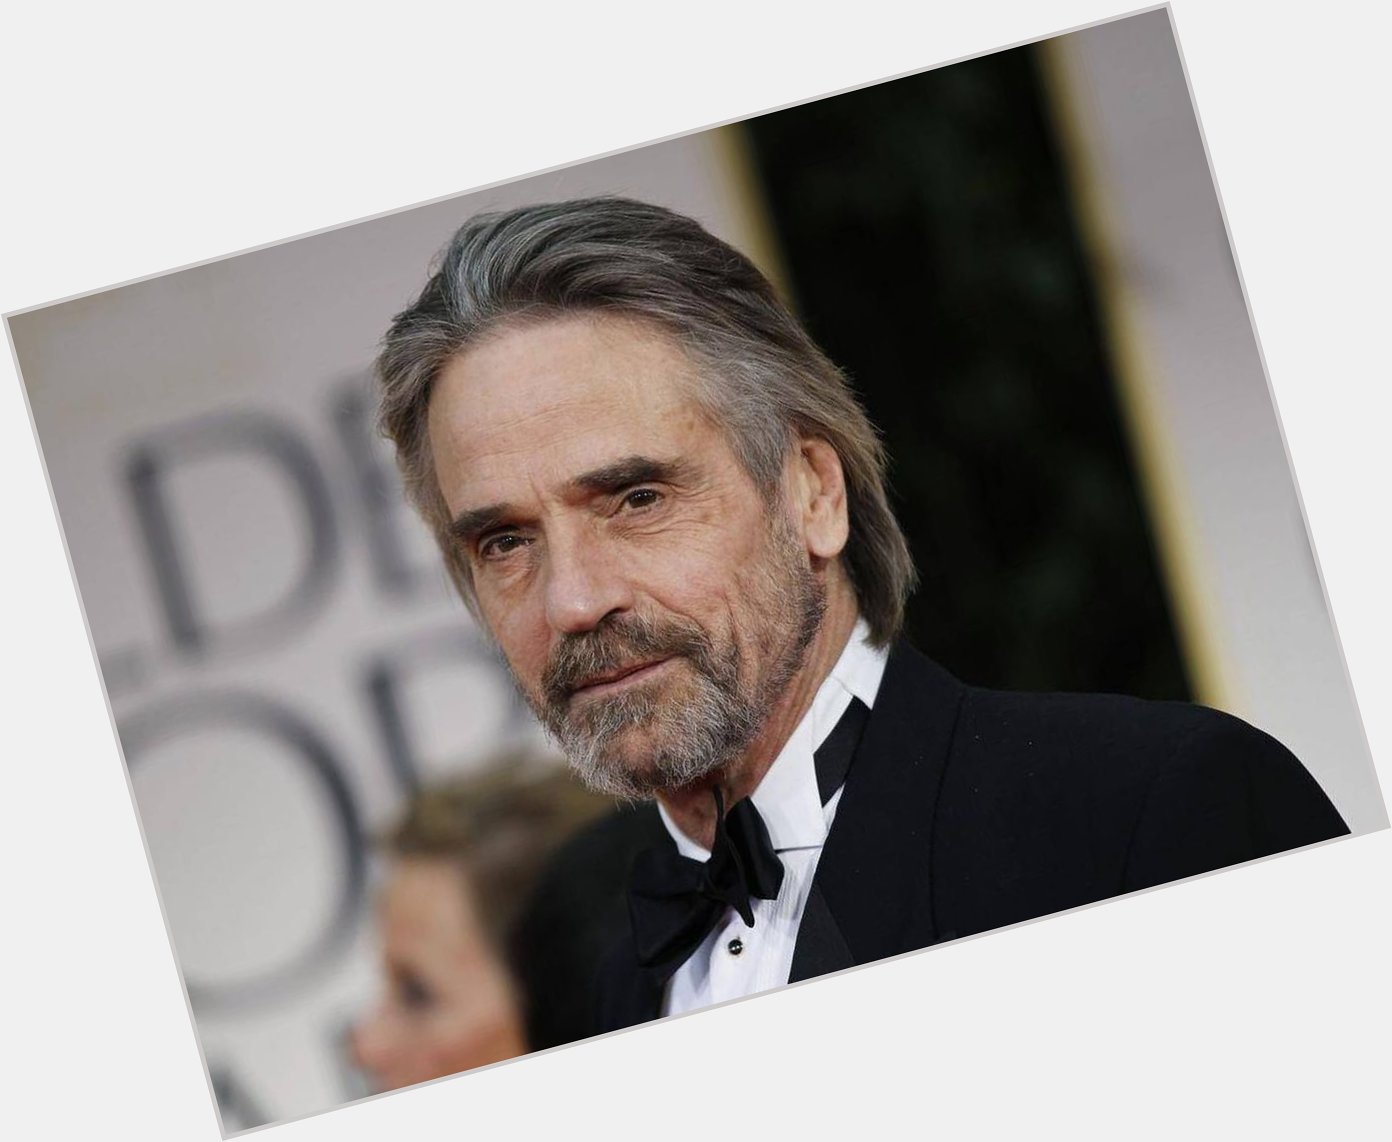 September 19, 2020
Happy birthday to British actor Jeremy Irons 72 years old. 